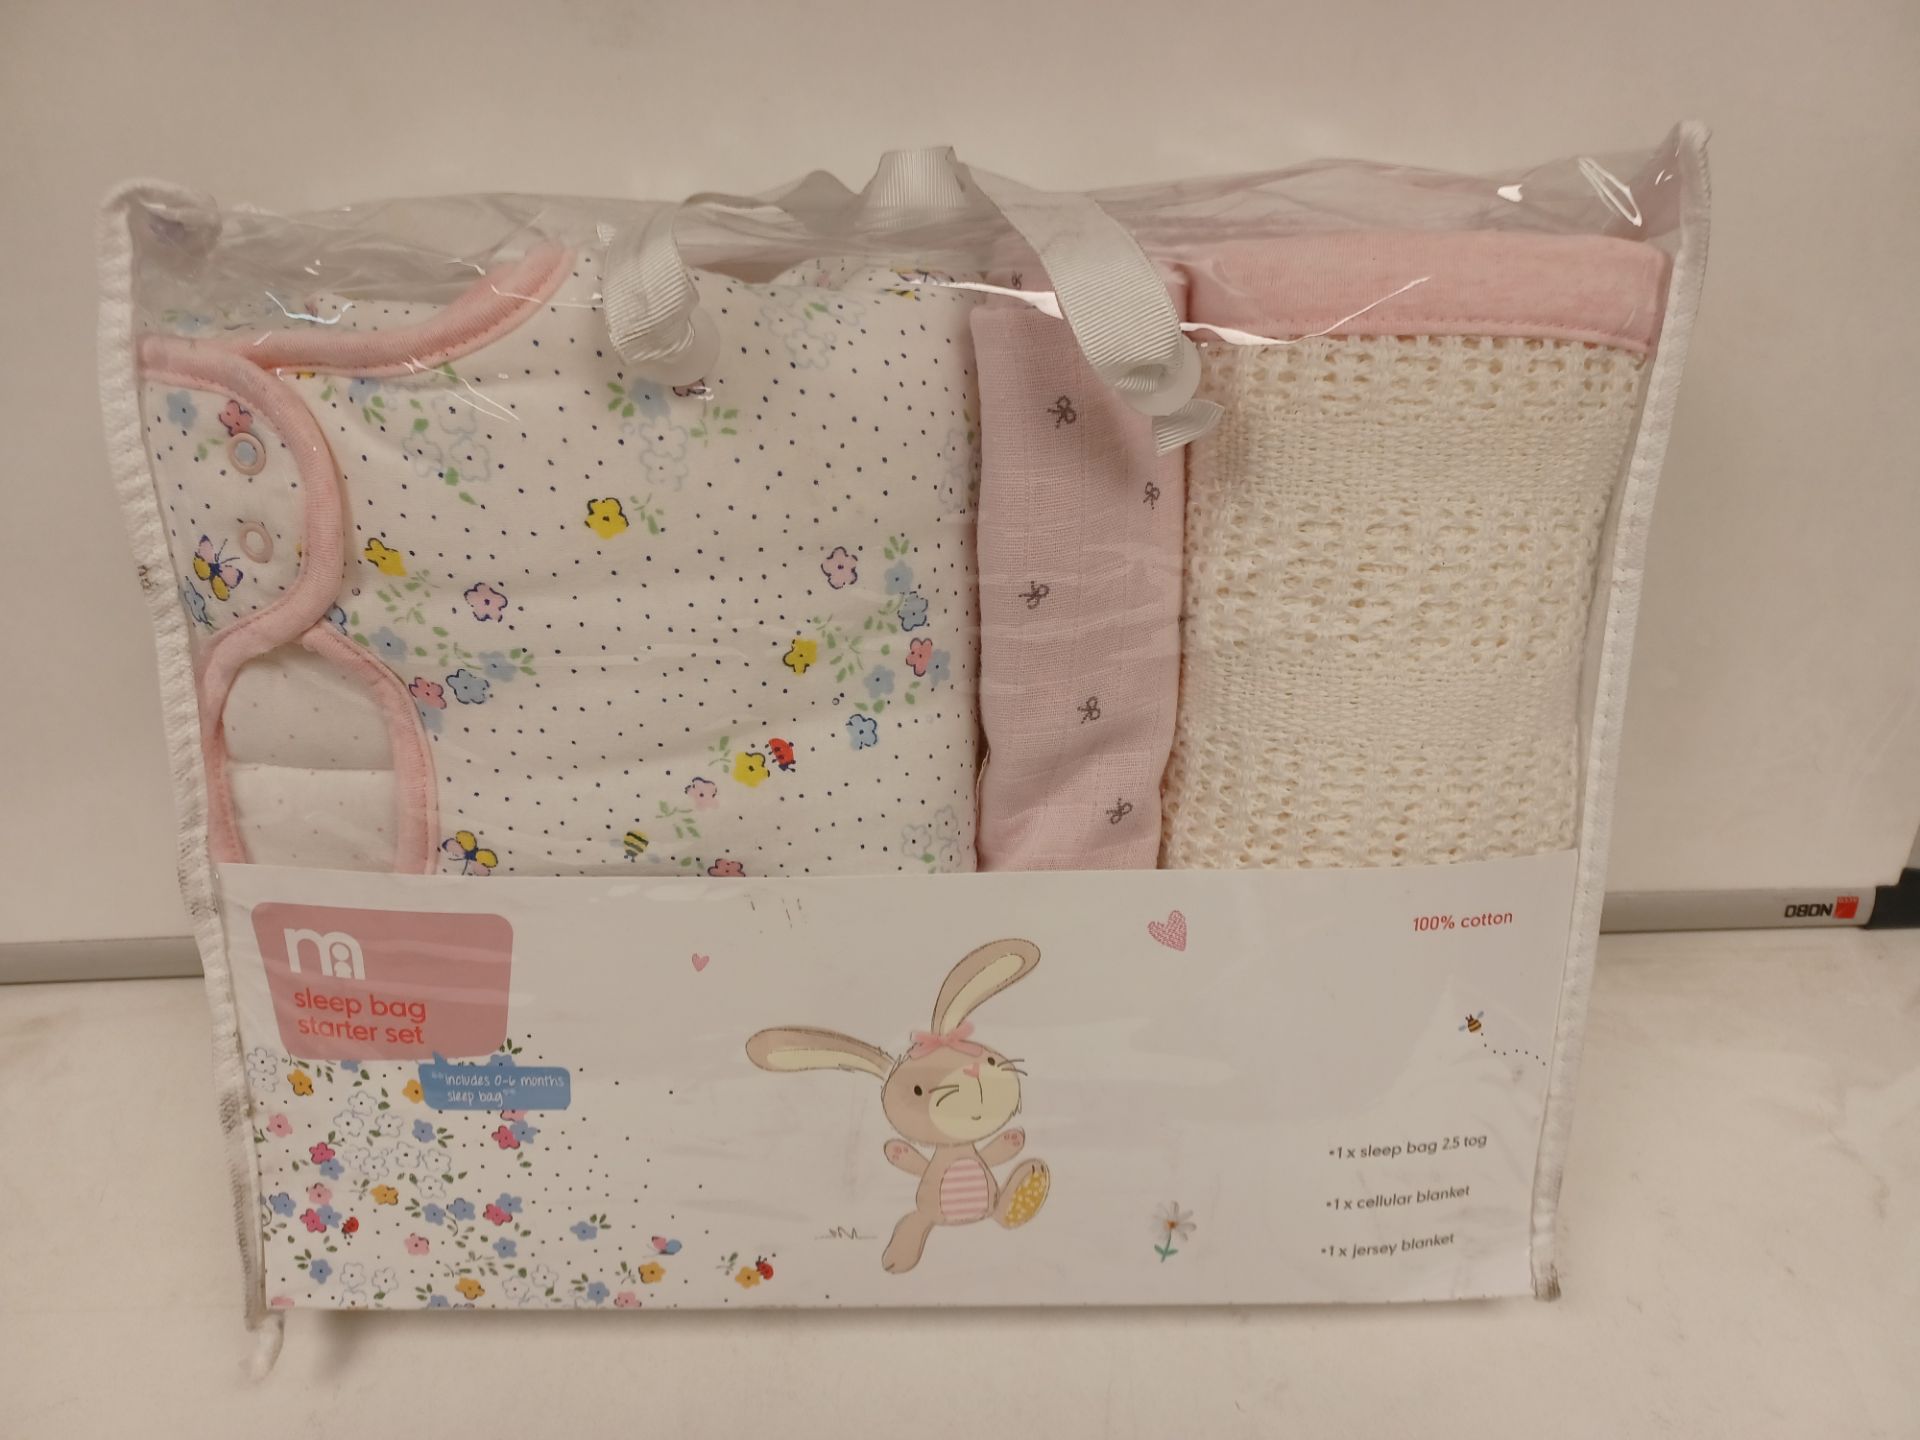 (NO VAT) 6 X NEW PACKAGED SETS OF MOTHERCARE SLEEP BAG STARTER SET. 100% COTTON. EACH CONTAINS: